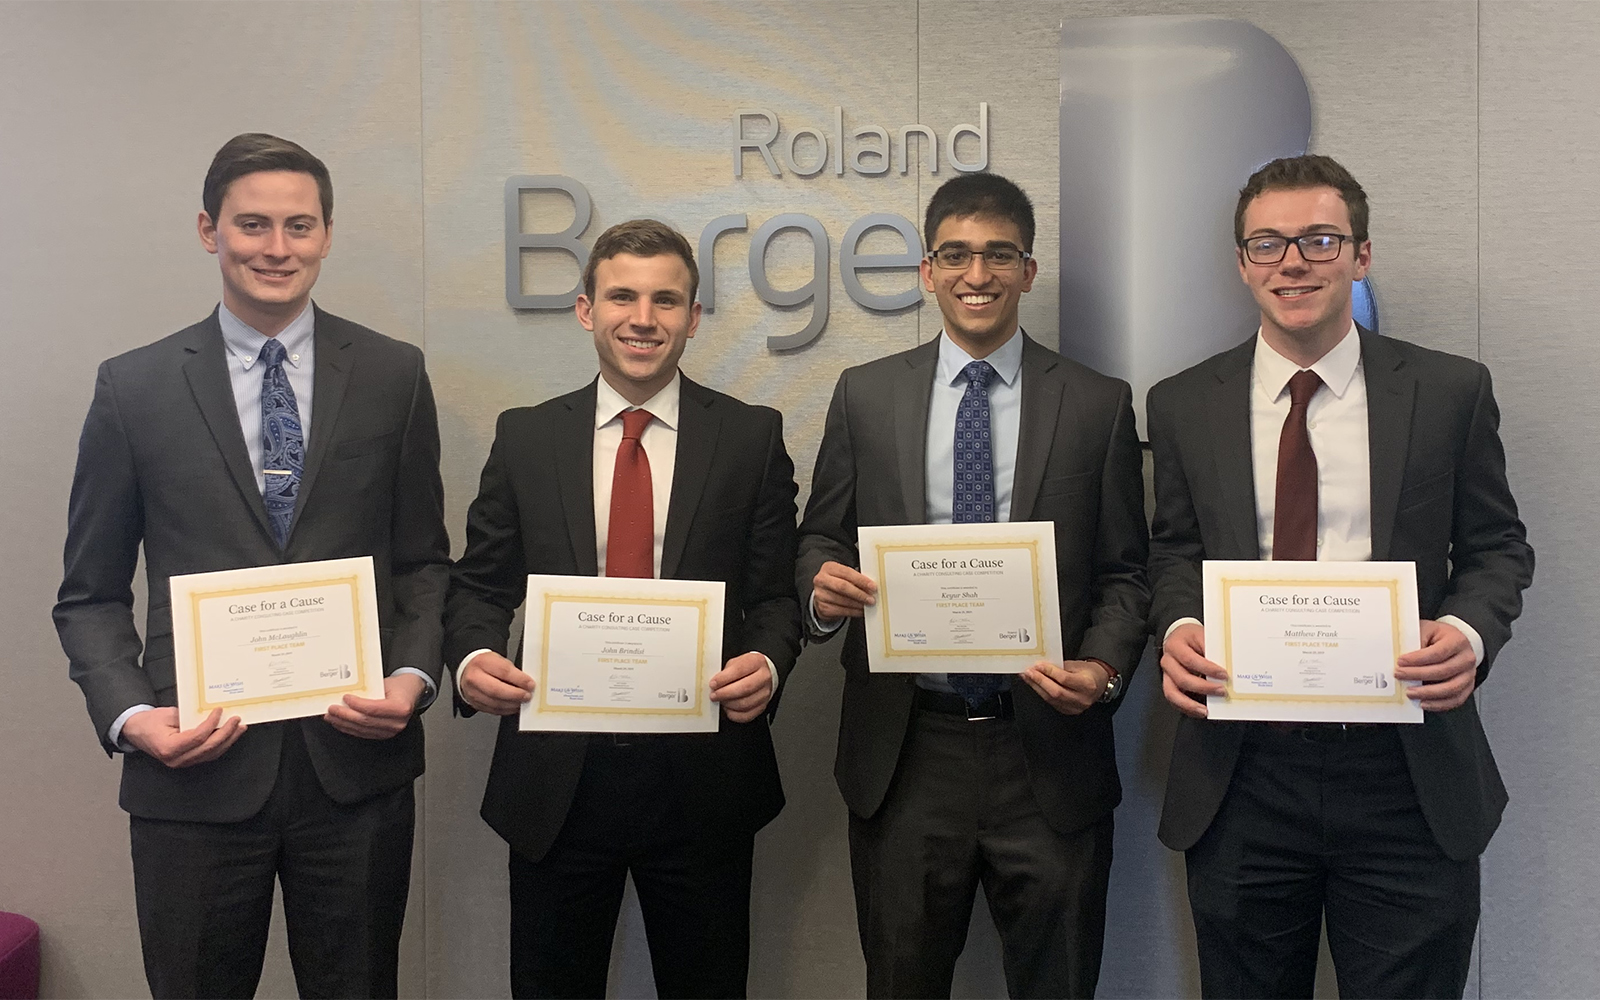 Left to right, John McLaughlin, John Brindisi, Keyur Shah, and Matthew Frank accepting their awards at the "Case for a Cause" competition (Photo courtesy of John McLaughlin)